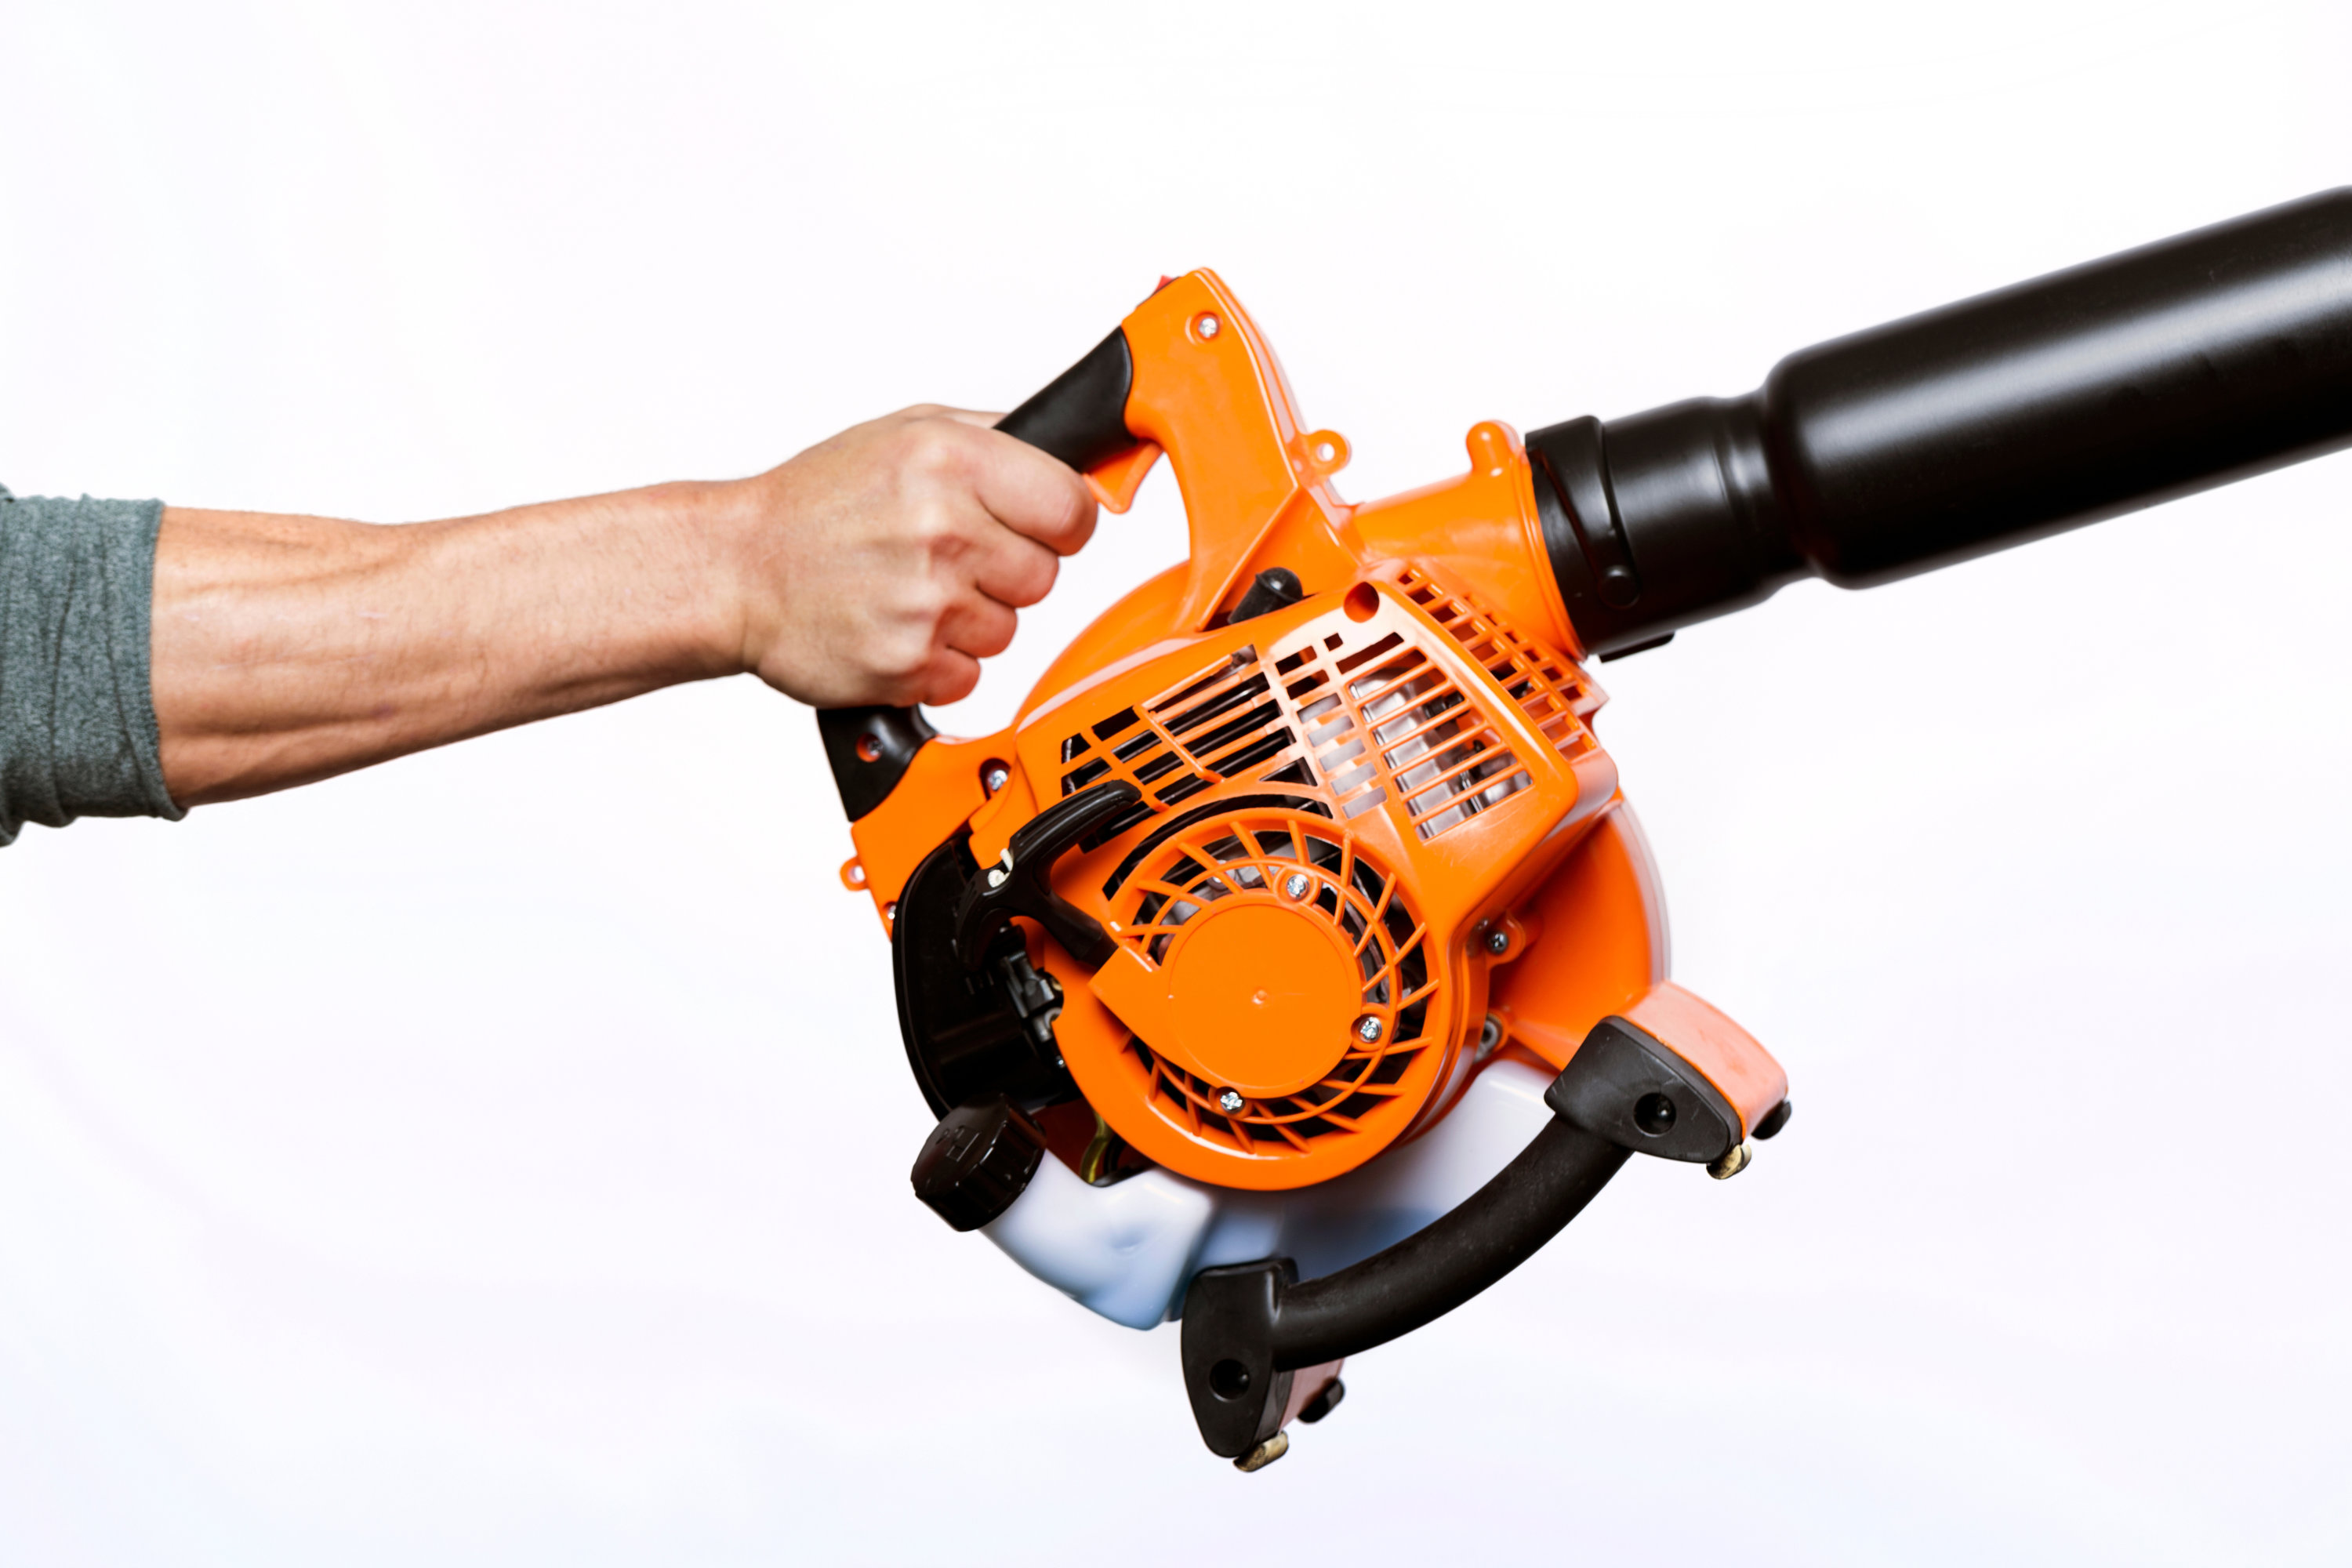 Gas Leaf Blowers Are Banned in DC. How's That Going? - Washingtonian